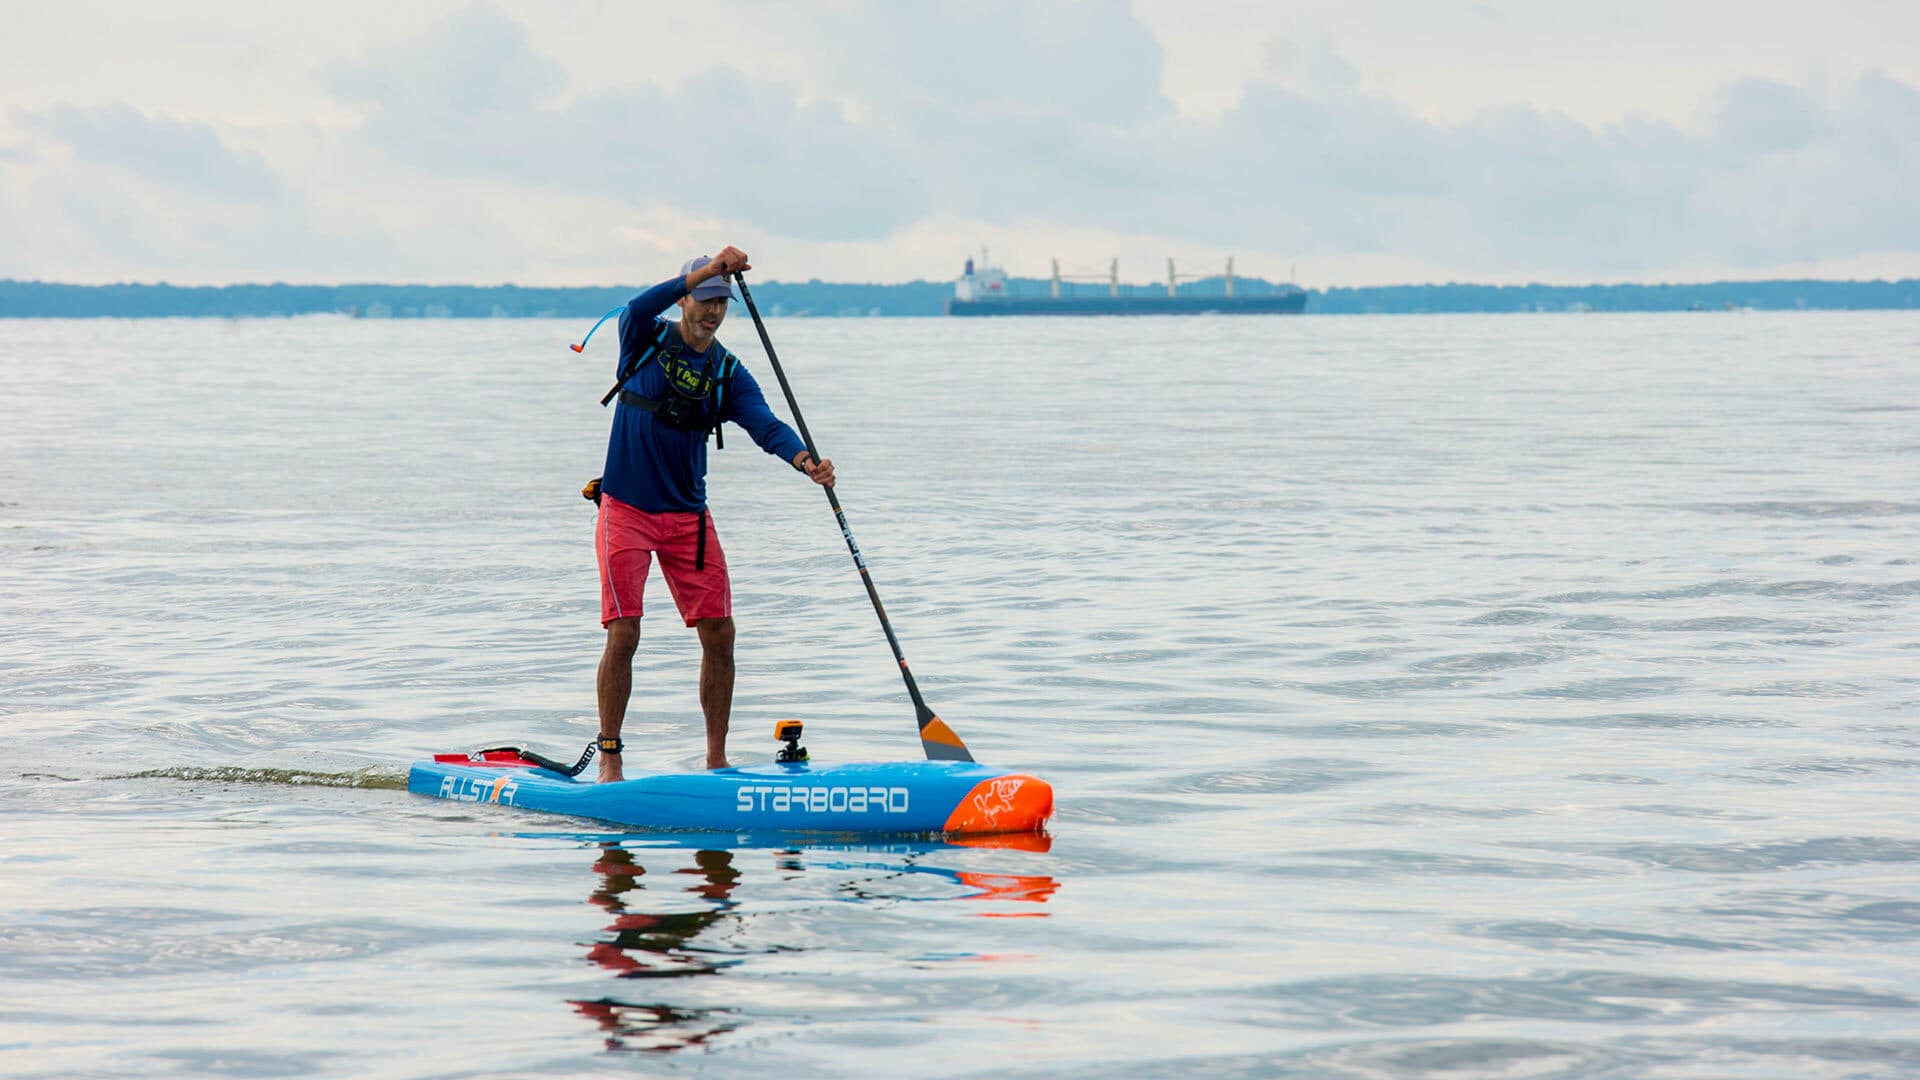 Chris Hopkinson ’96 paddles on a stand-up paddleboard